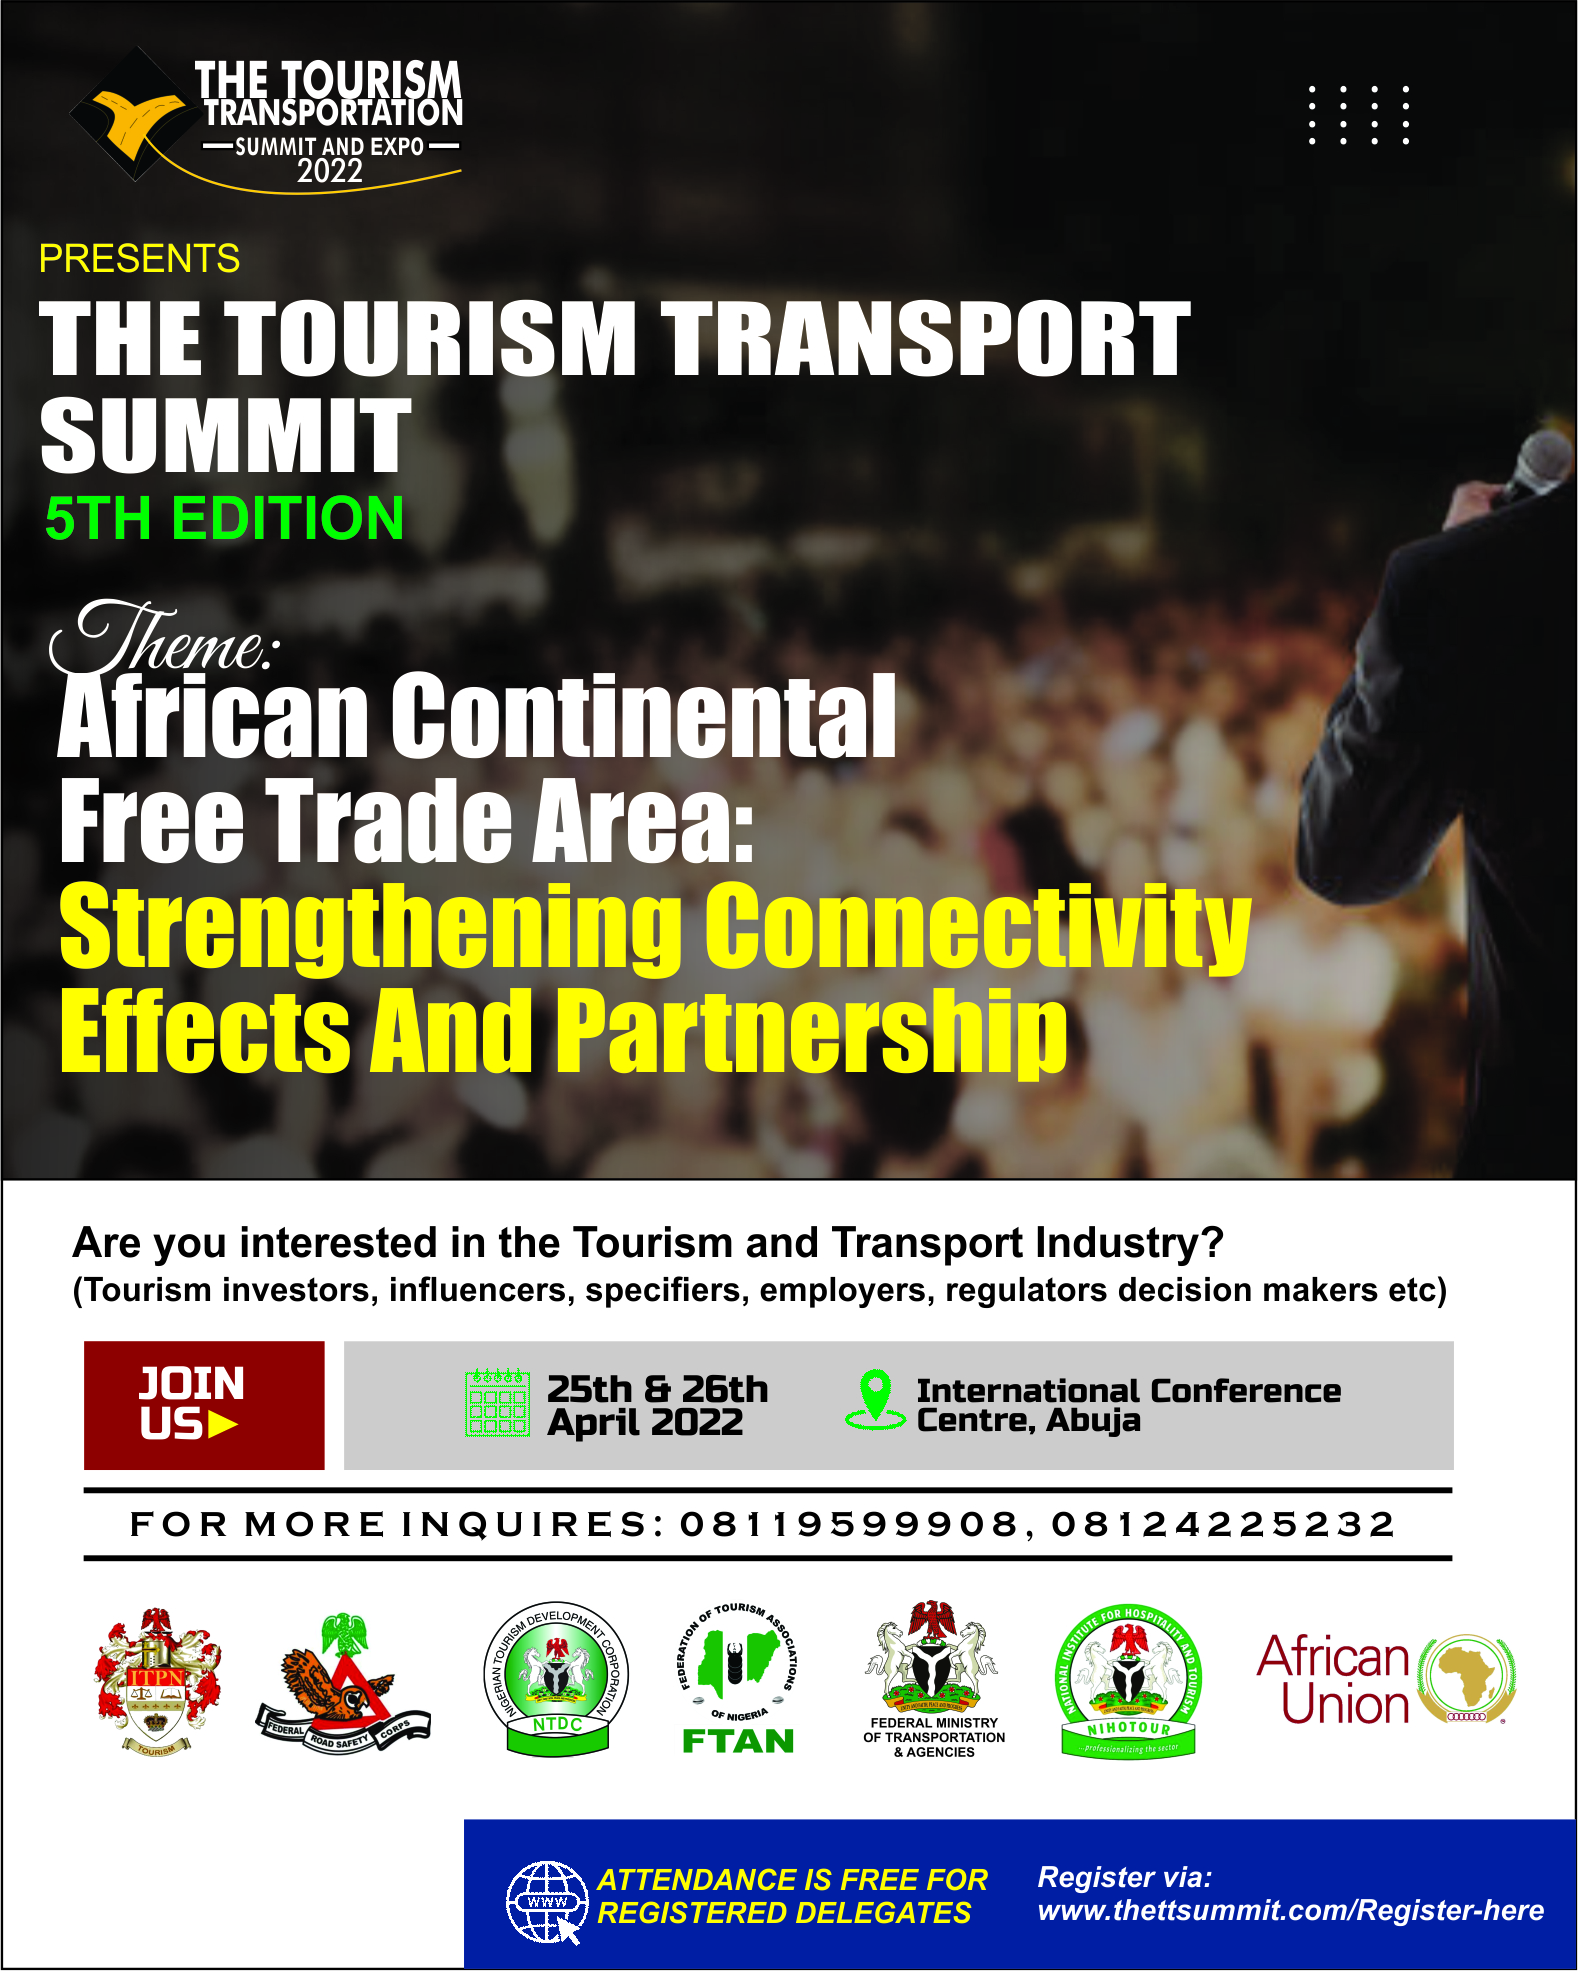 THE NATIONAL TOURISM TRANSPORTATION SUMMIT & EXPO